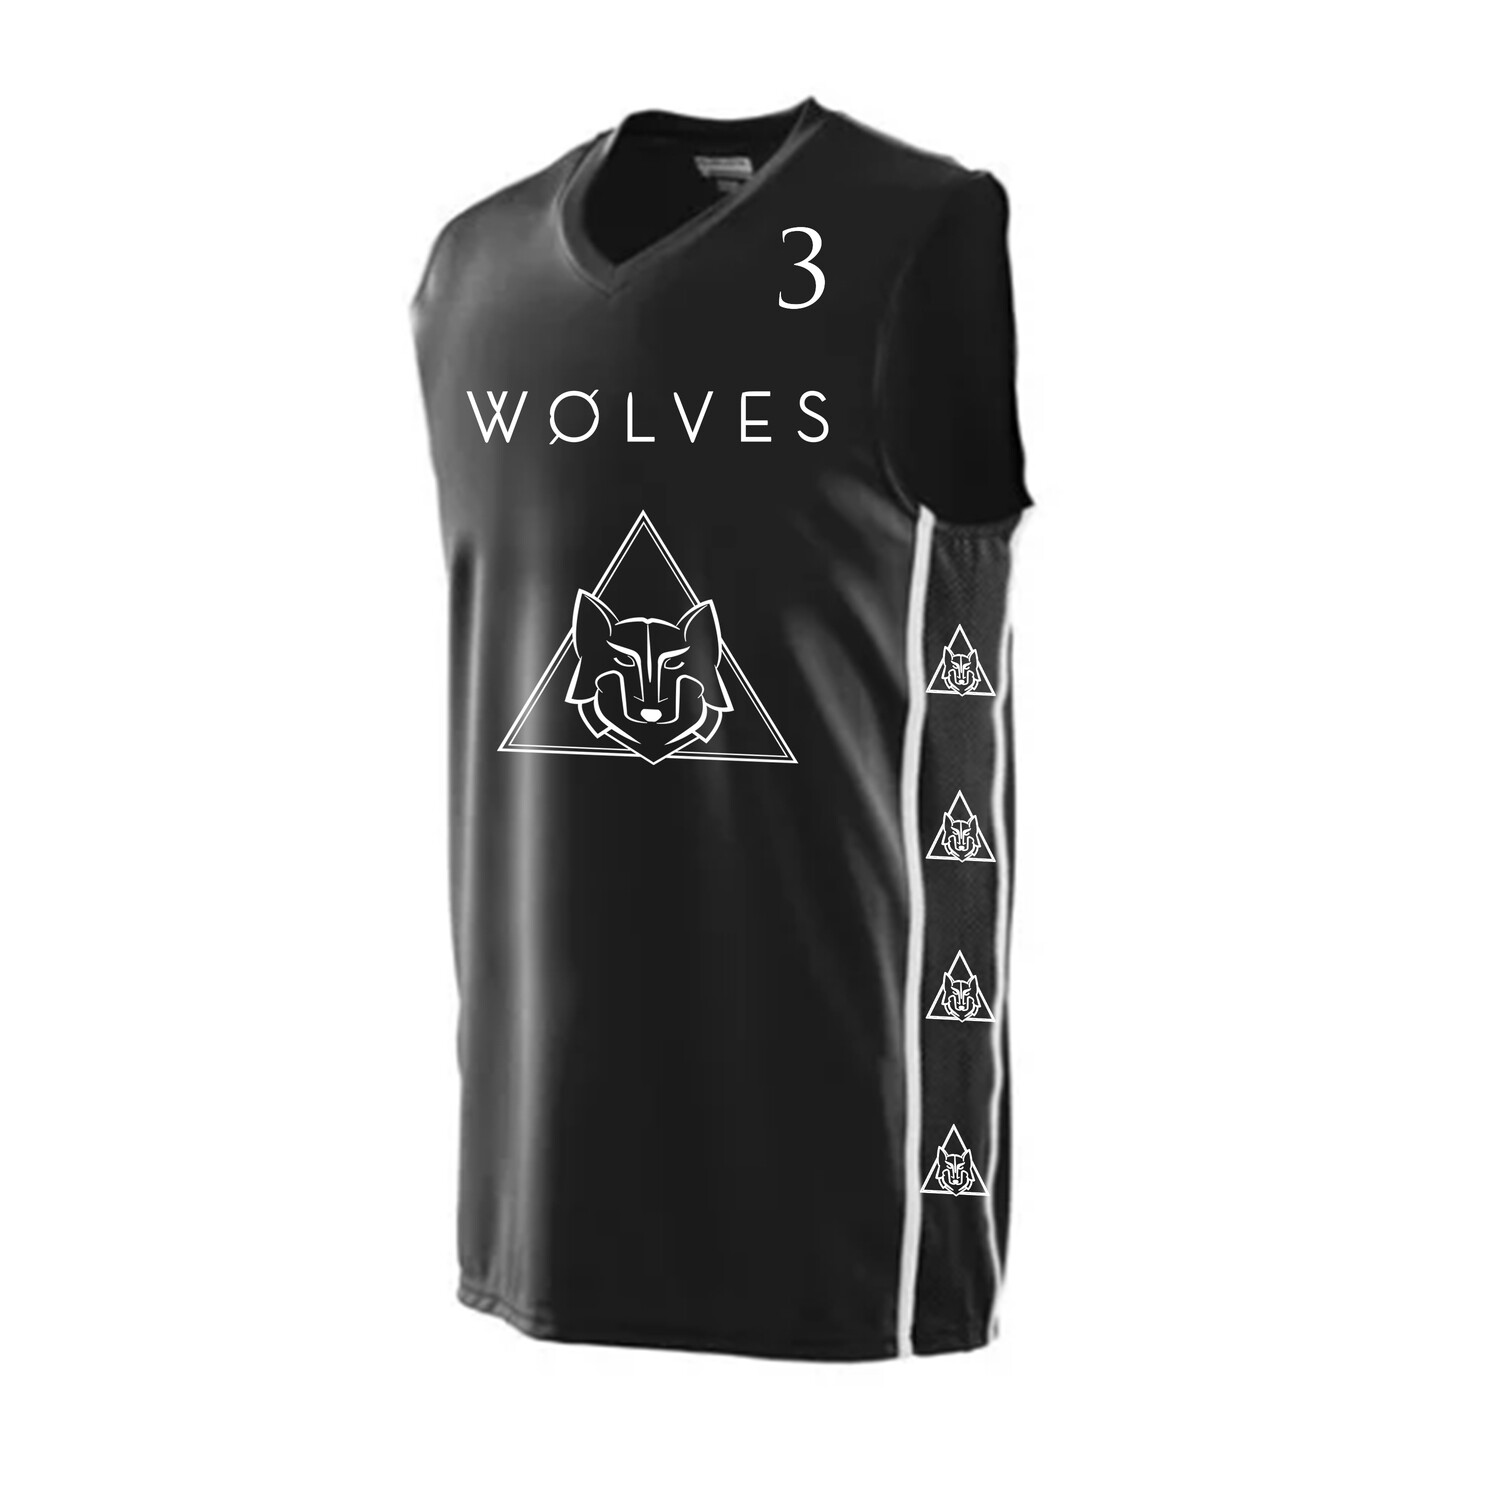 The Wolves Team Jersey